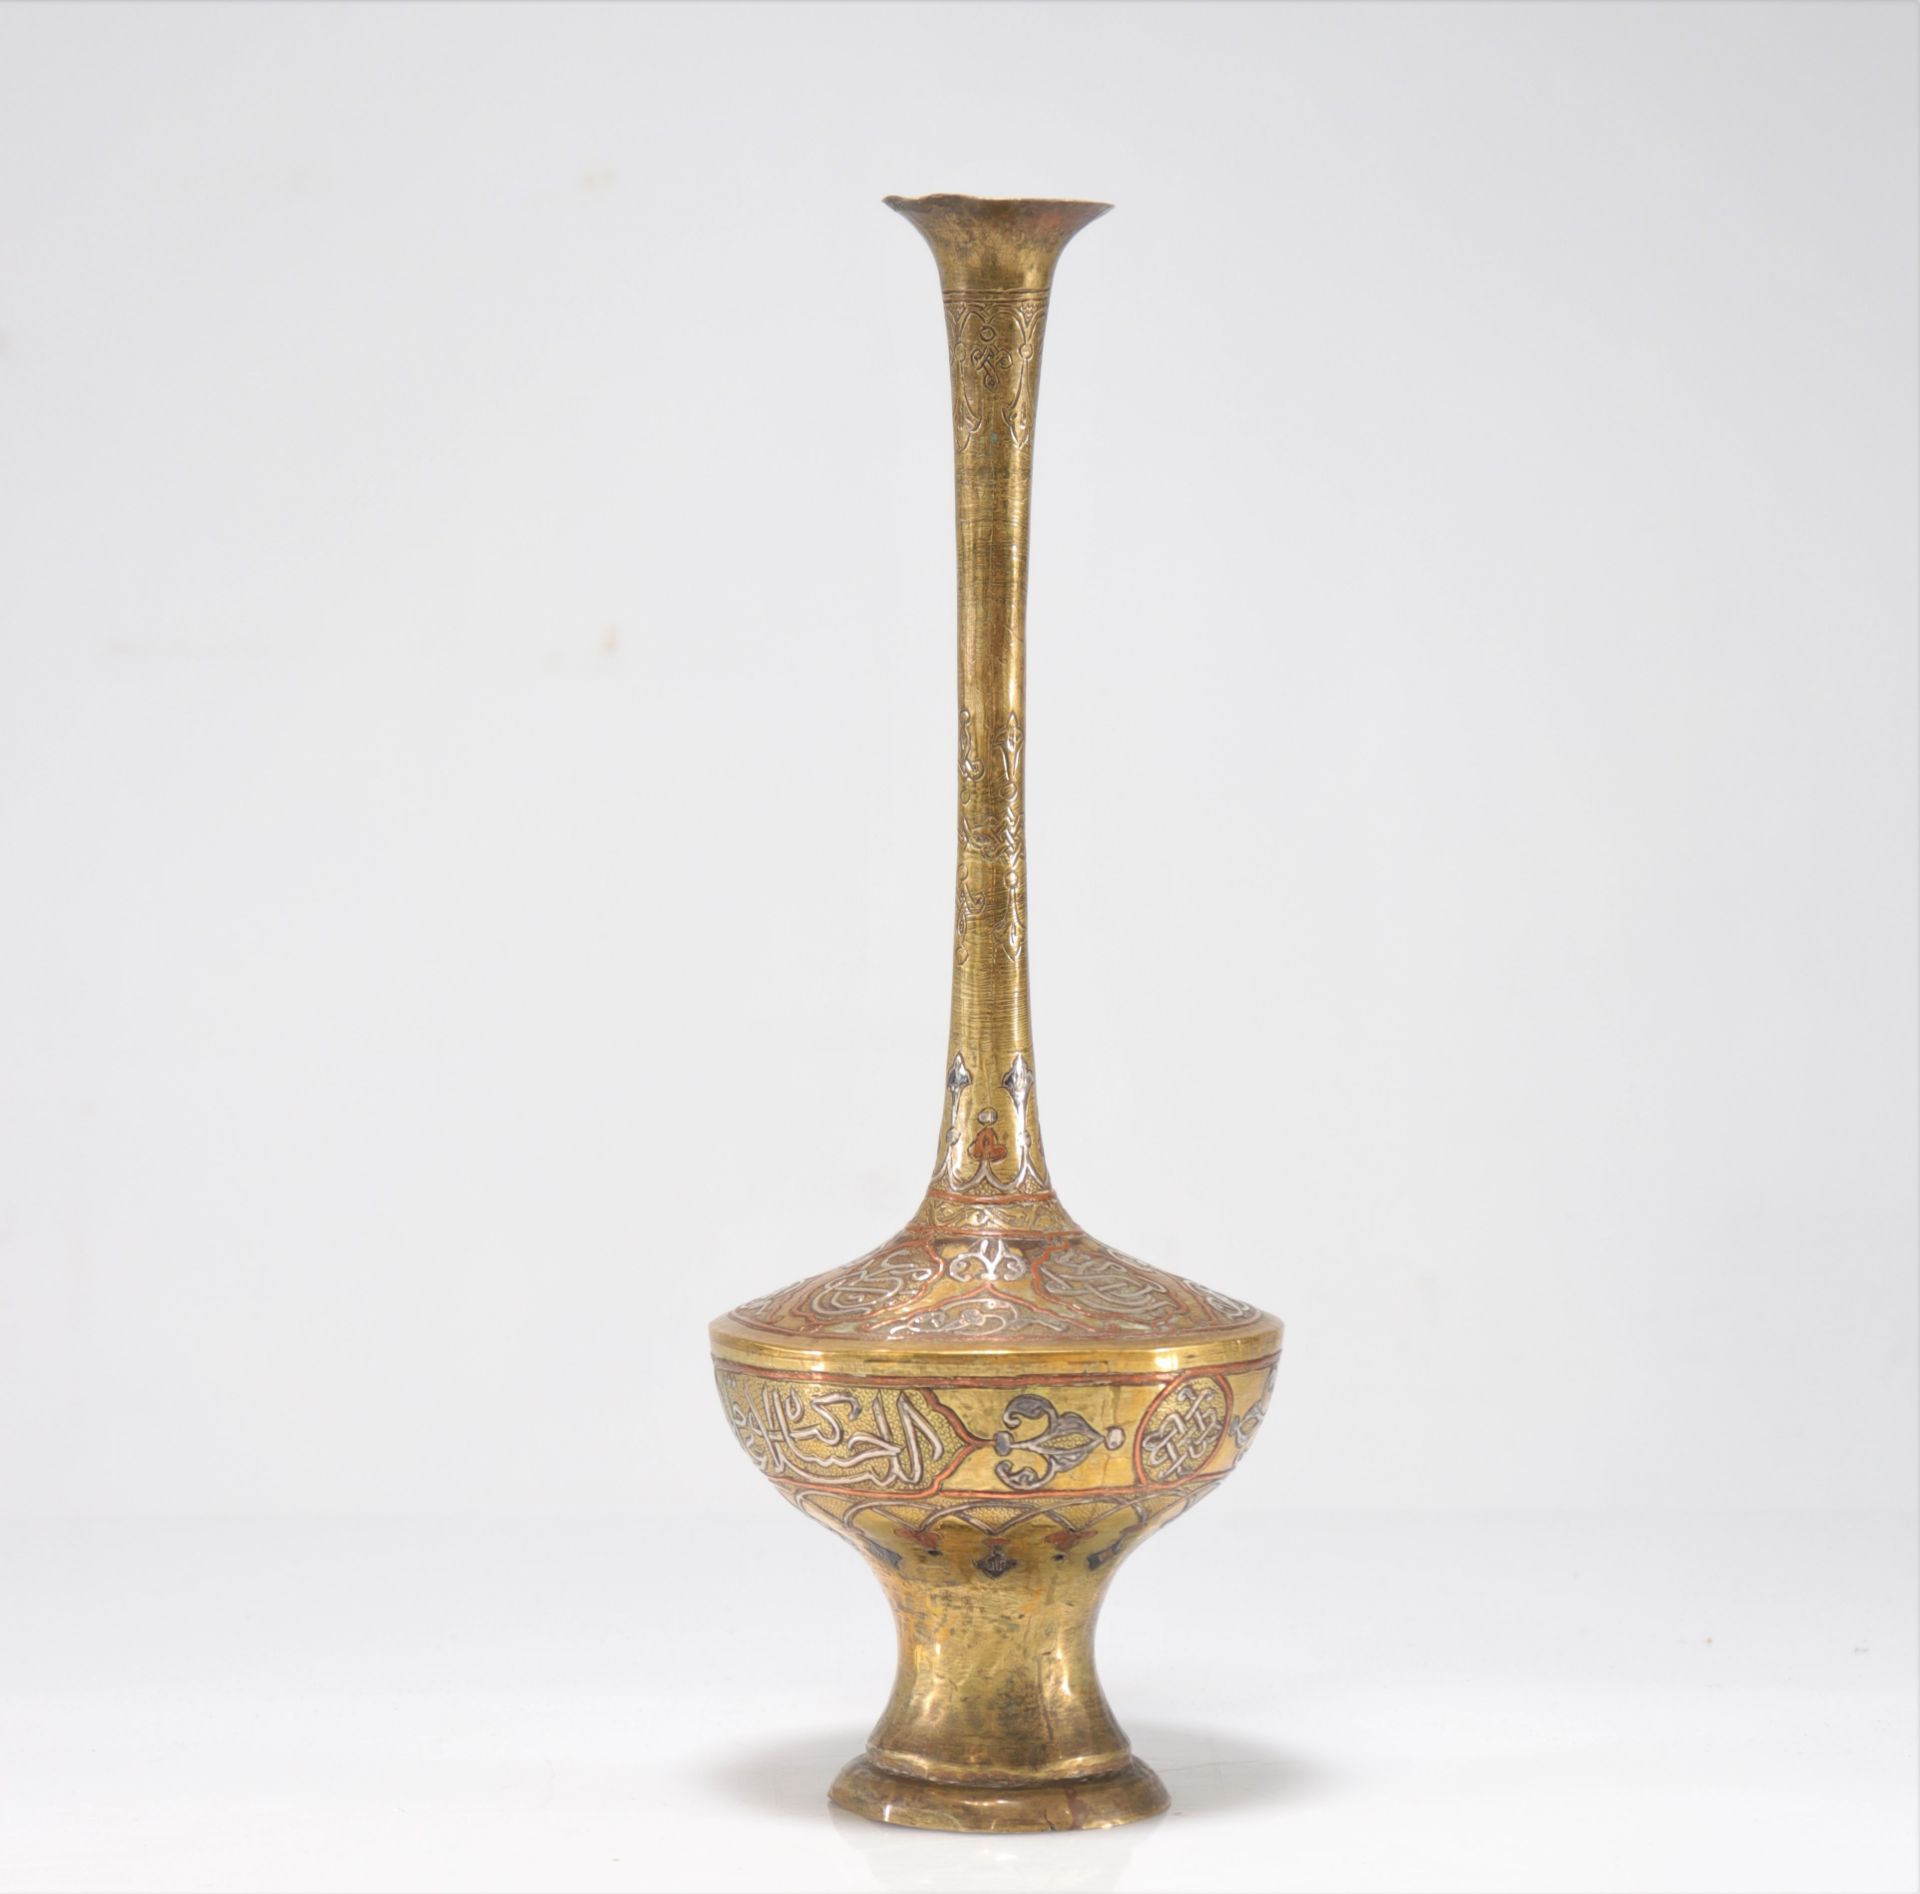 Ottoman vase brass and silver and copper inlay "Cairowe"